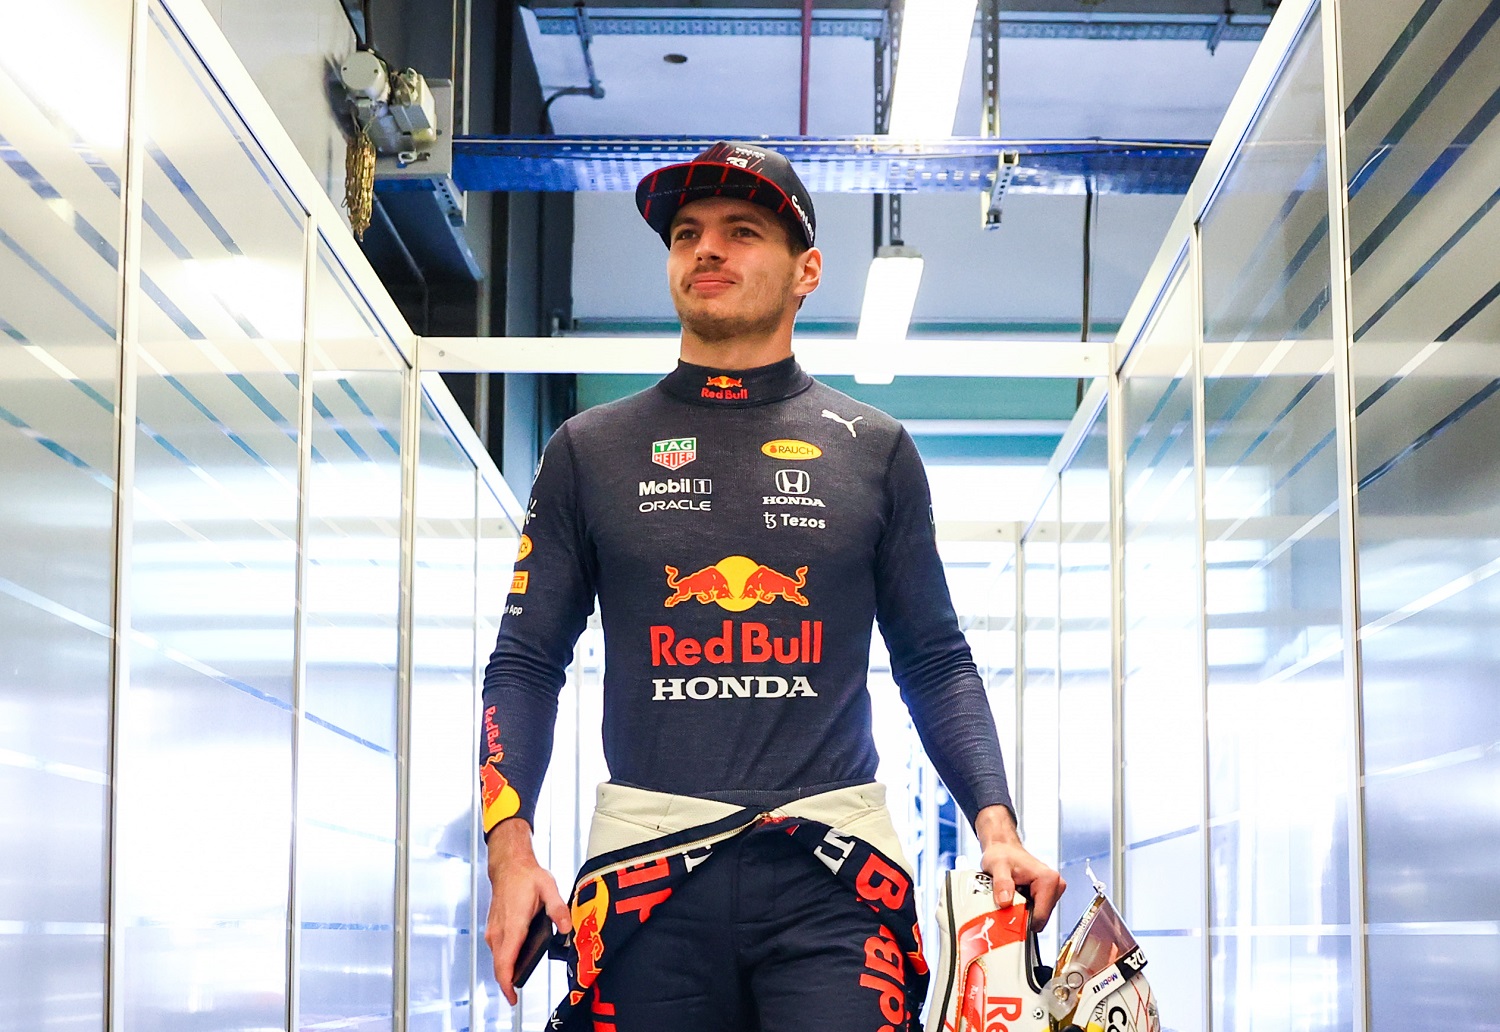 Max Verstappen Could Blow His Formula 1 Title Defense Before He Gets to COTA